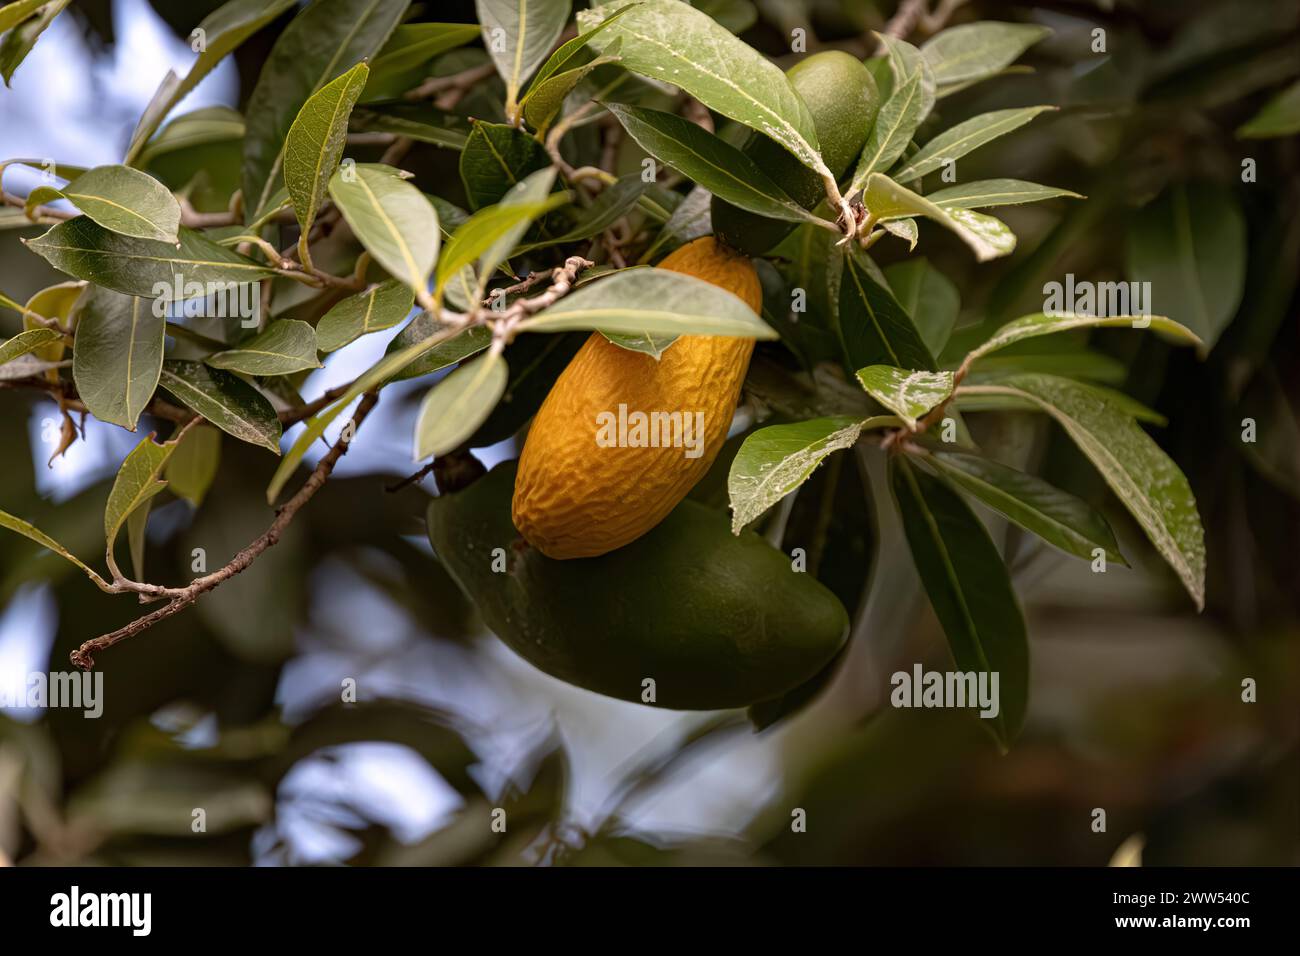 Foliage and Fruit of the South American plant called oiti of the species Licania tomentosa Stock Photo